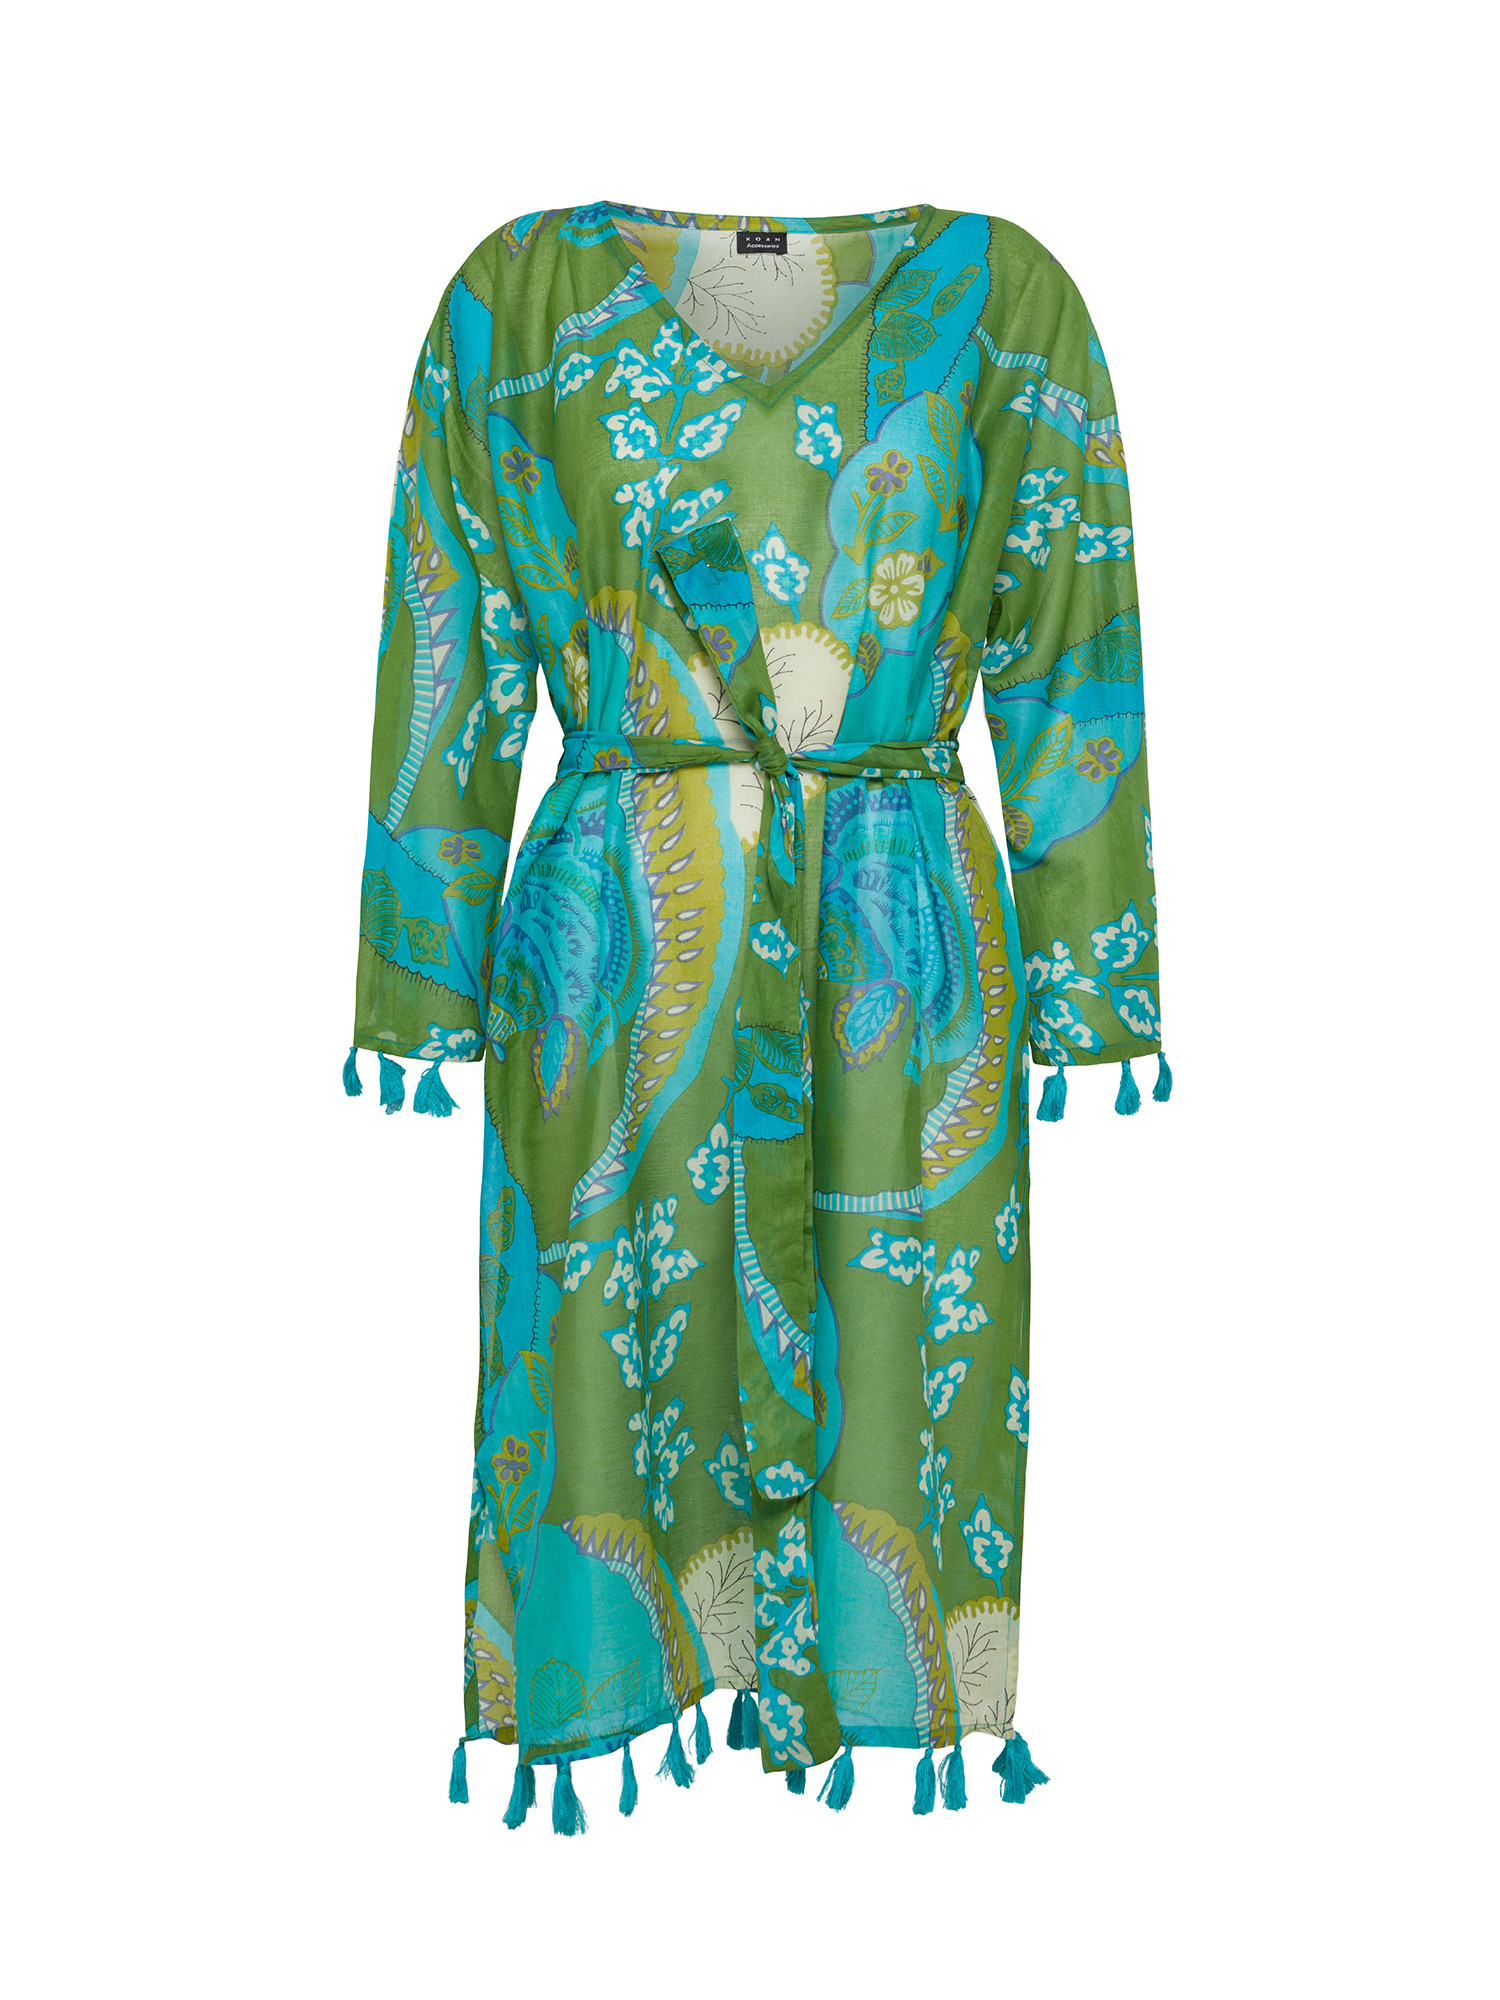 Koan - Cotton cover-up tunic with print, Green, large image number 0